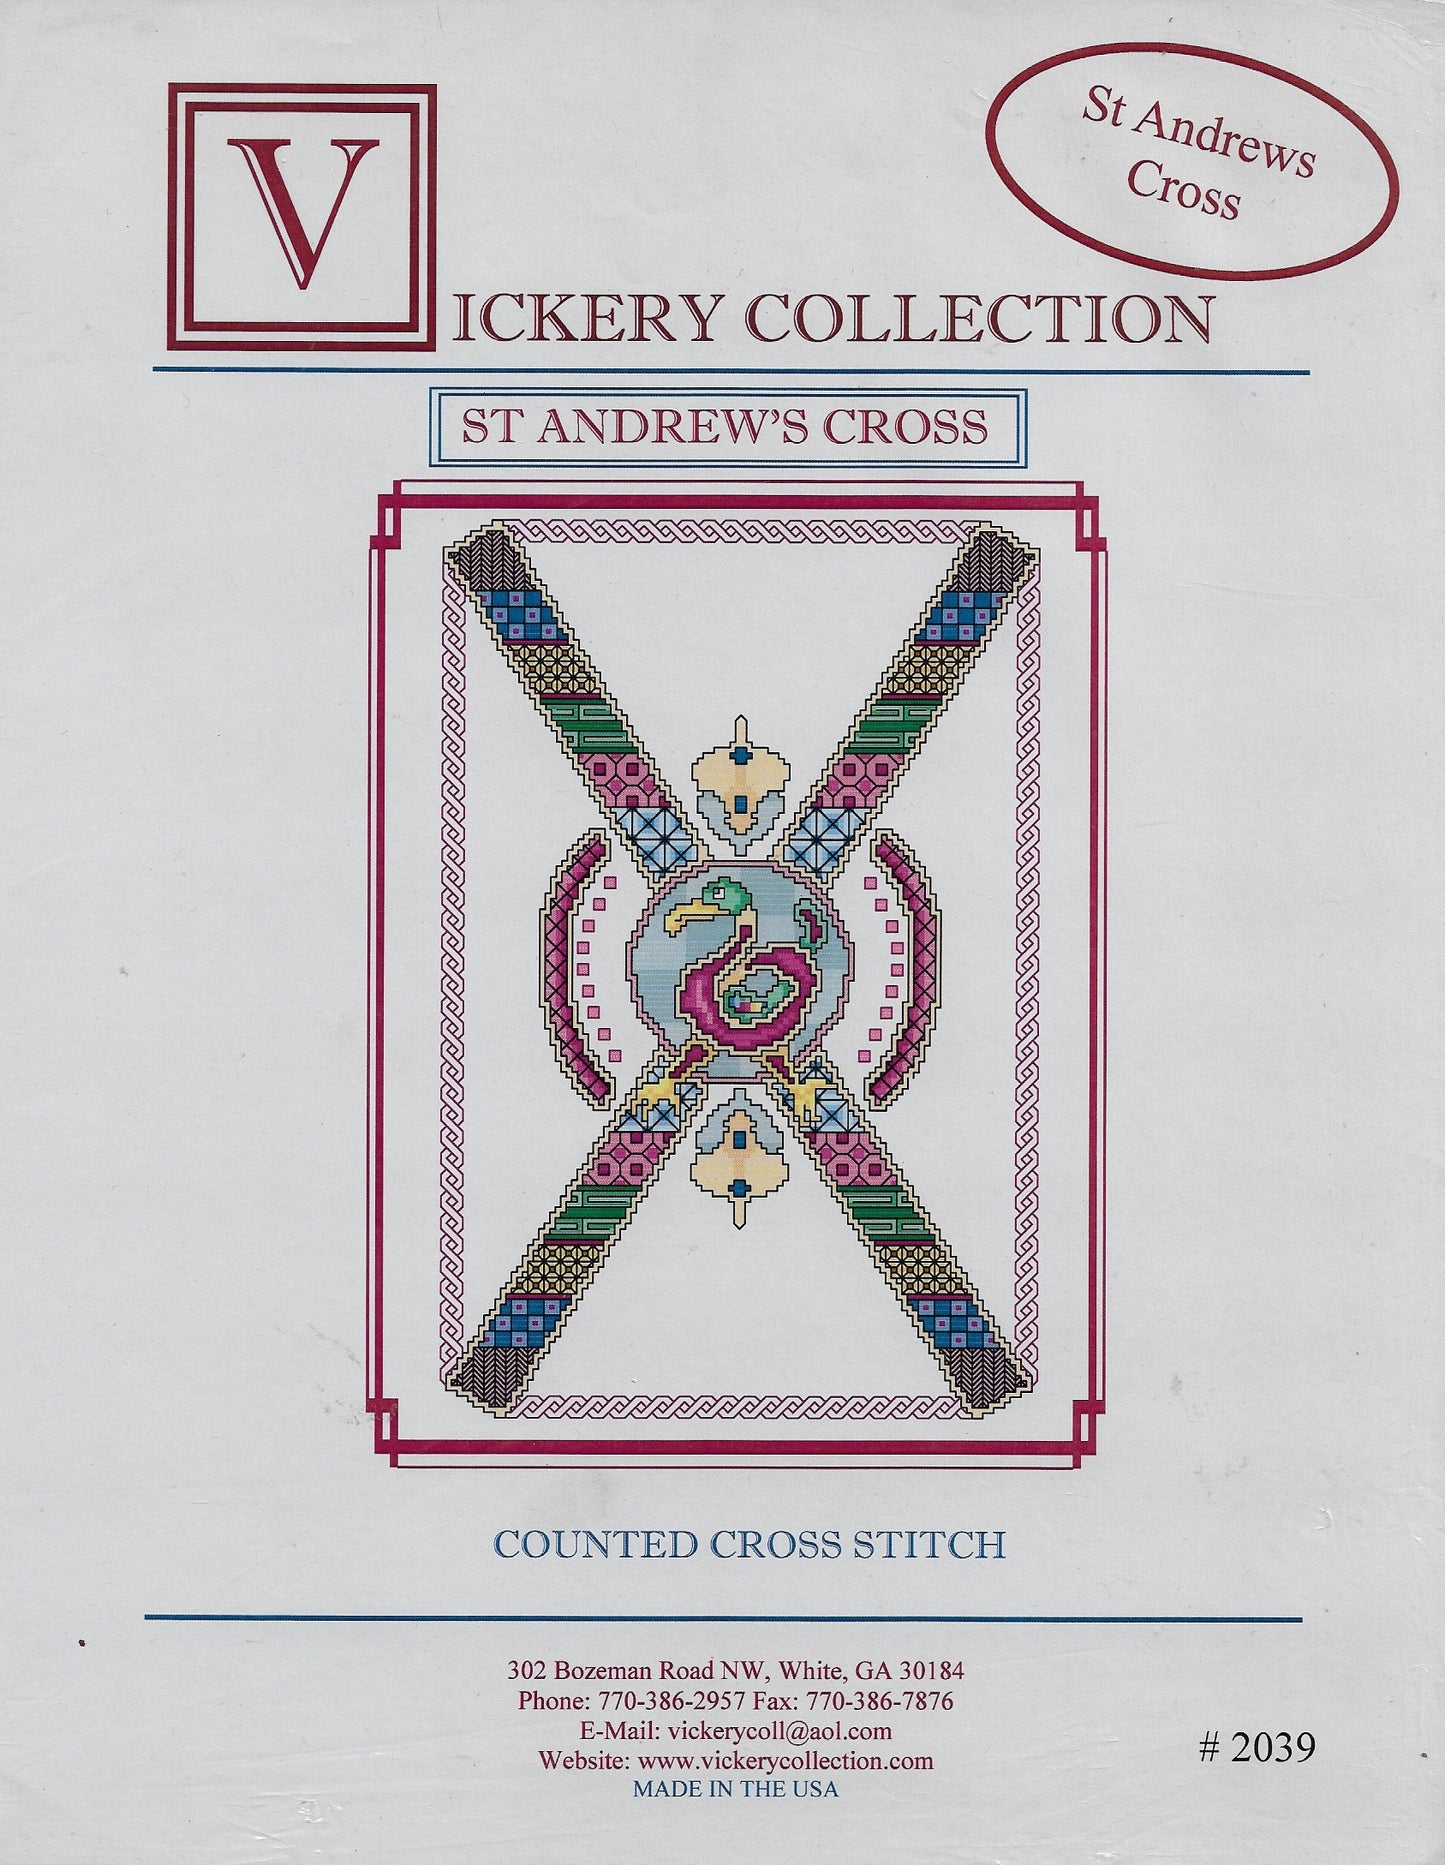 Vickery Collection St Andrews Cross cross stitch pattern